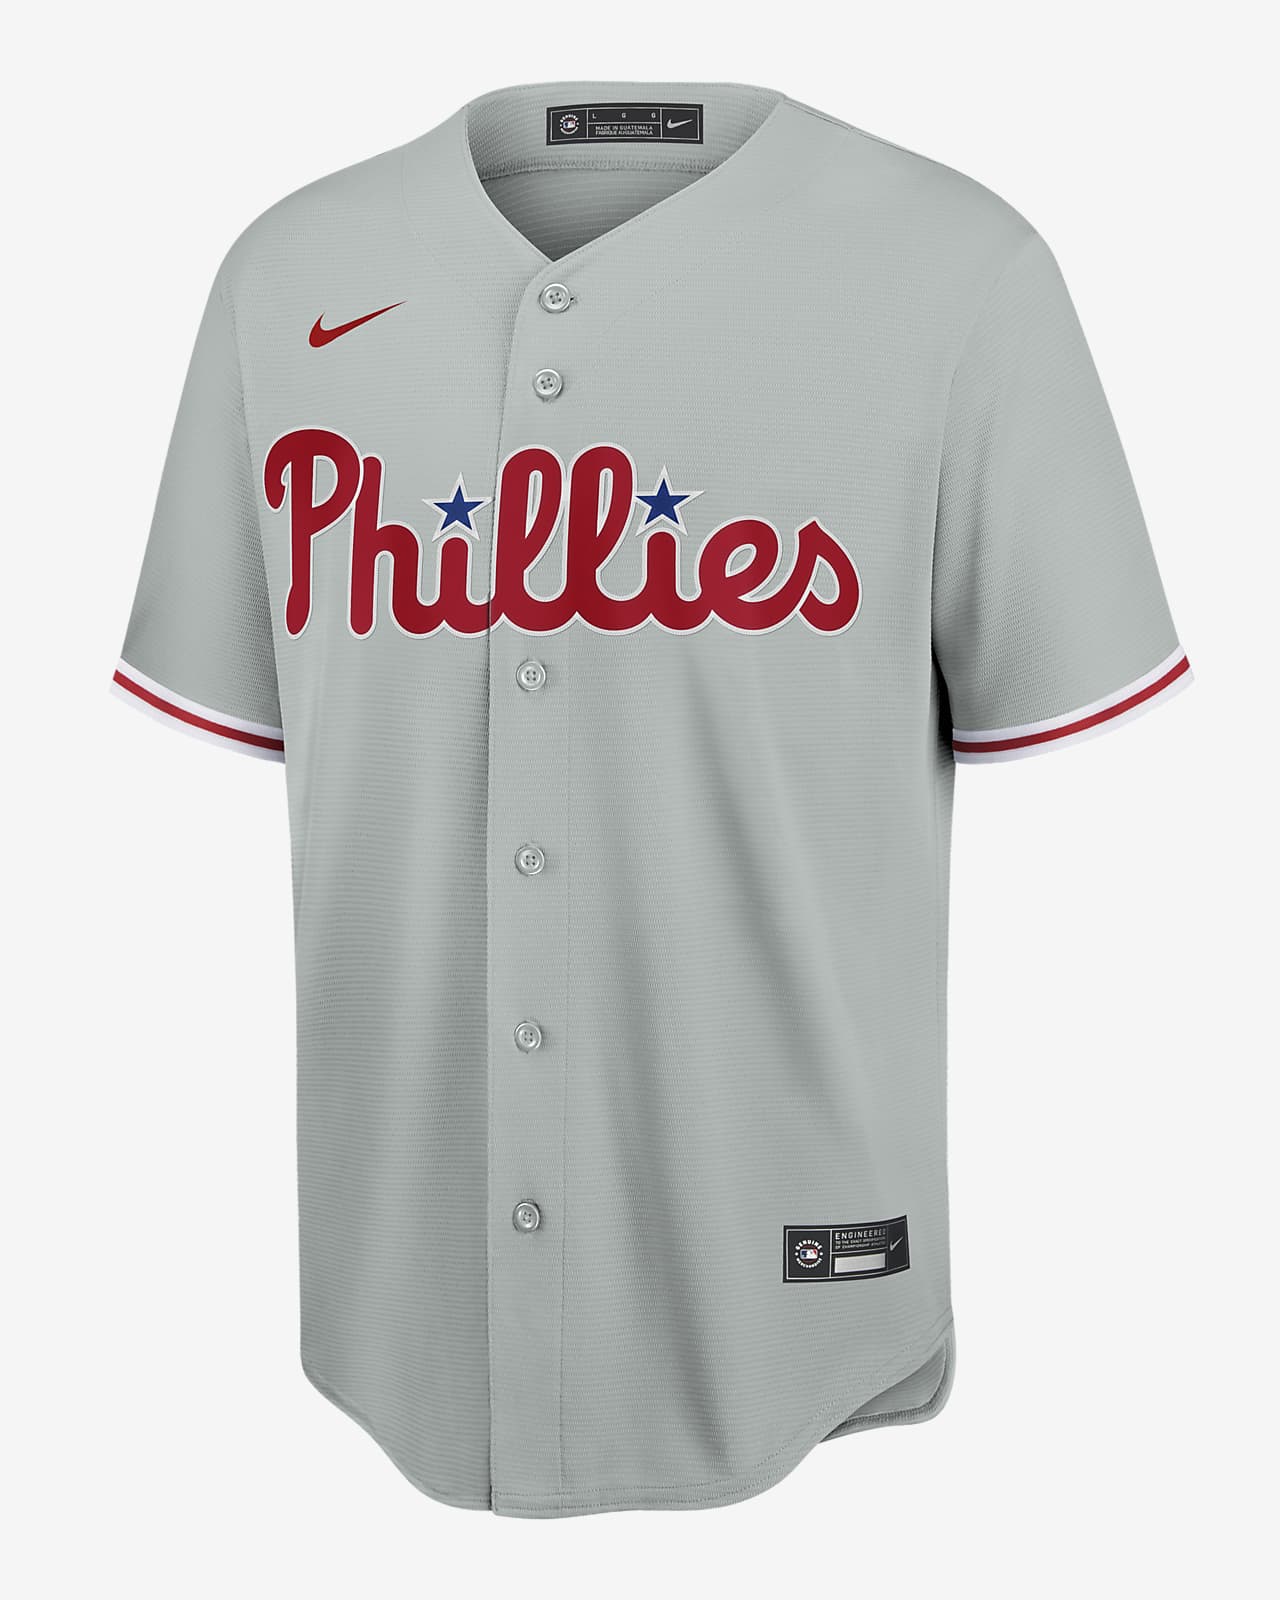 big and tall phillies jersey